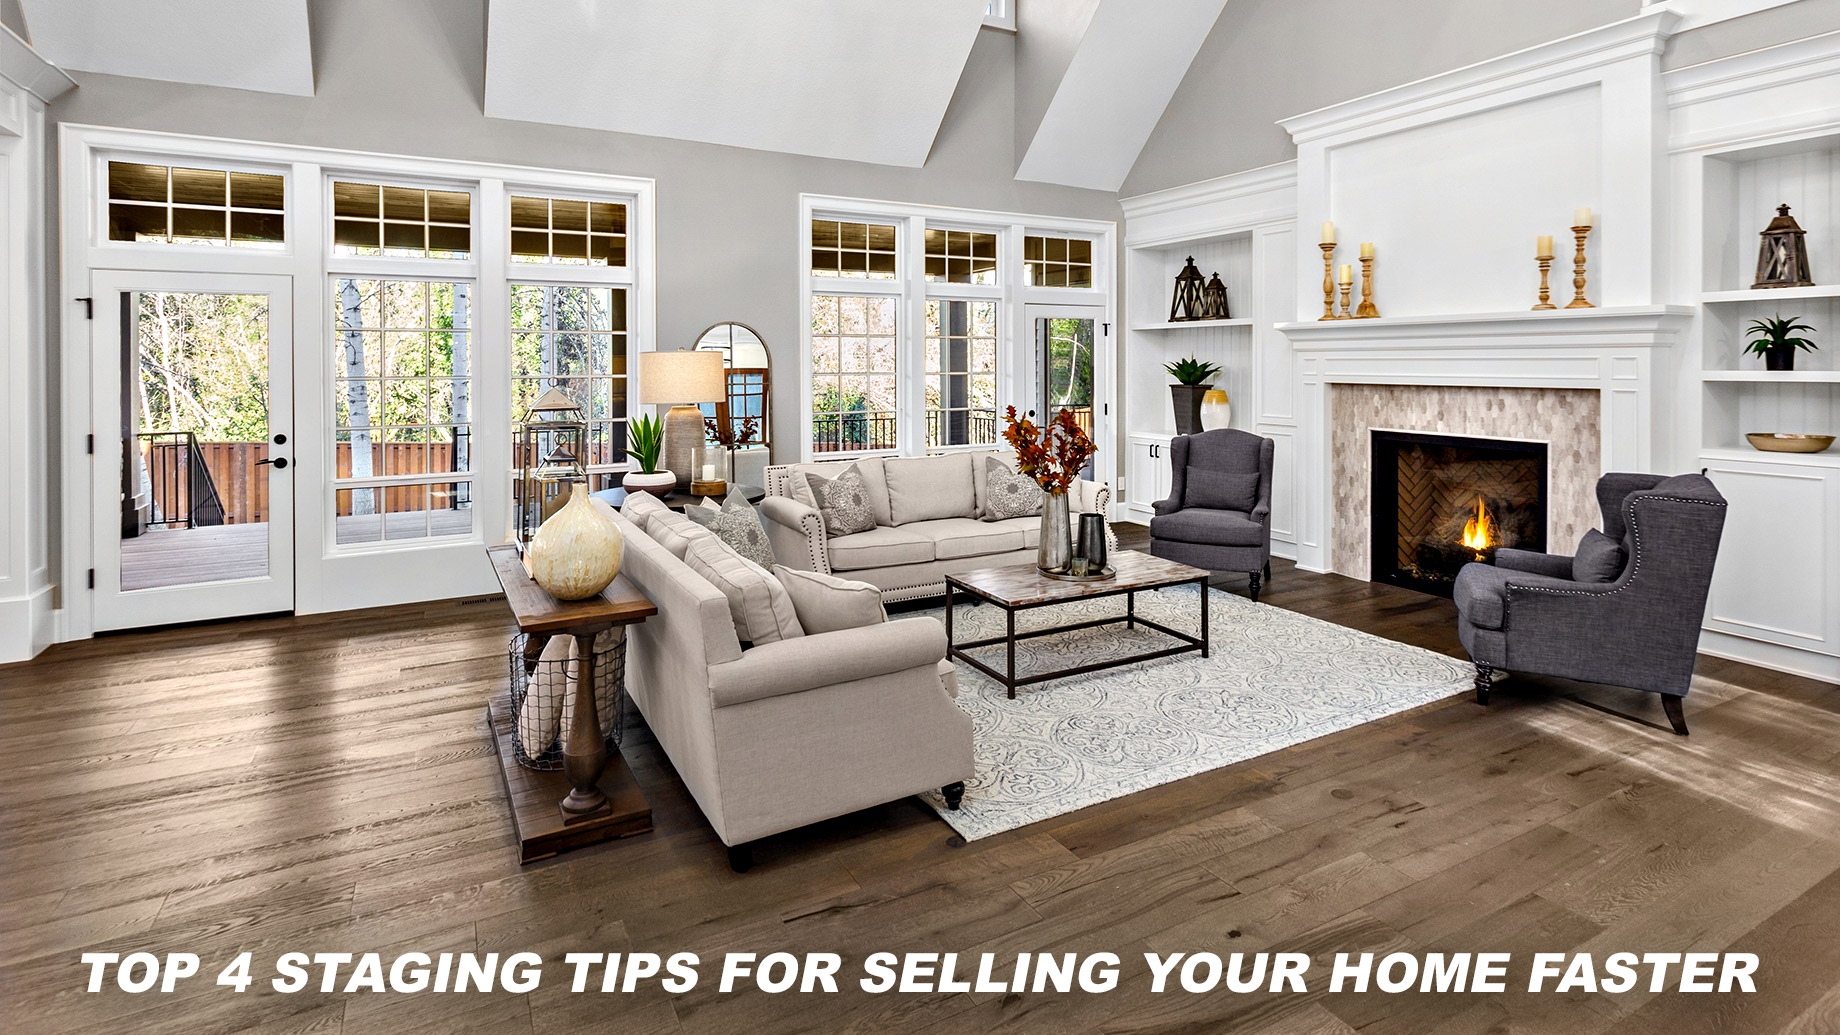 Top 4 Staging Tips For Selling Your Home Faster